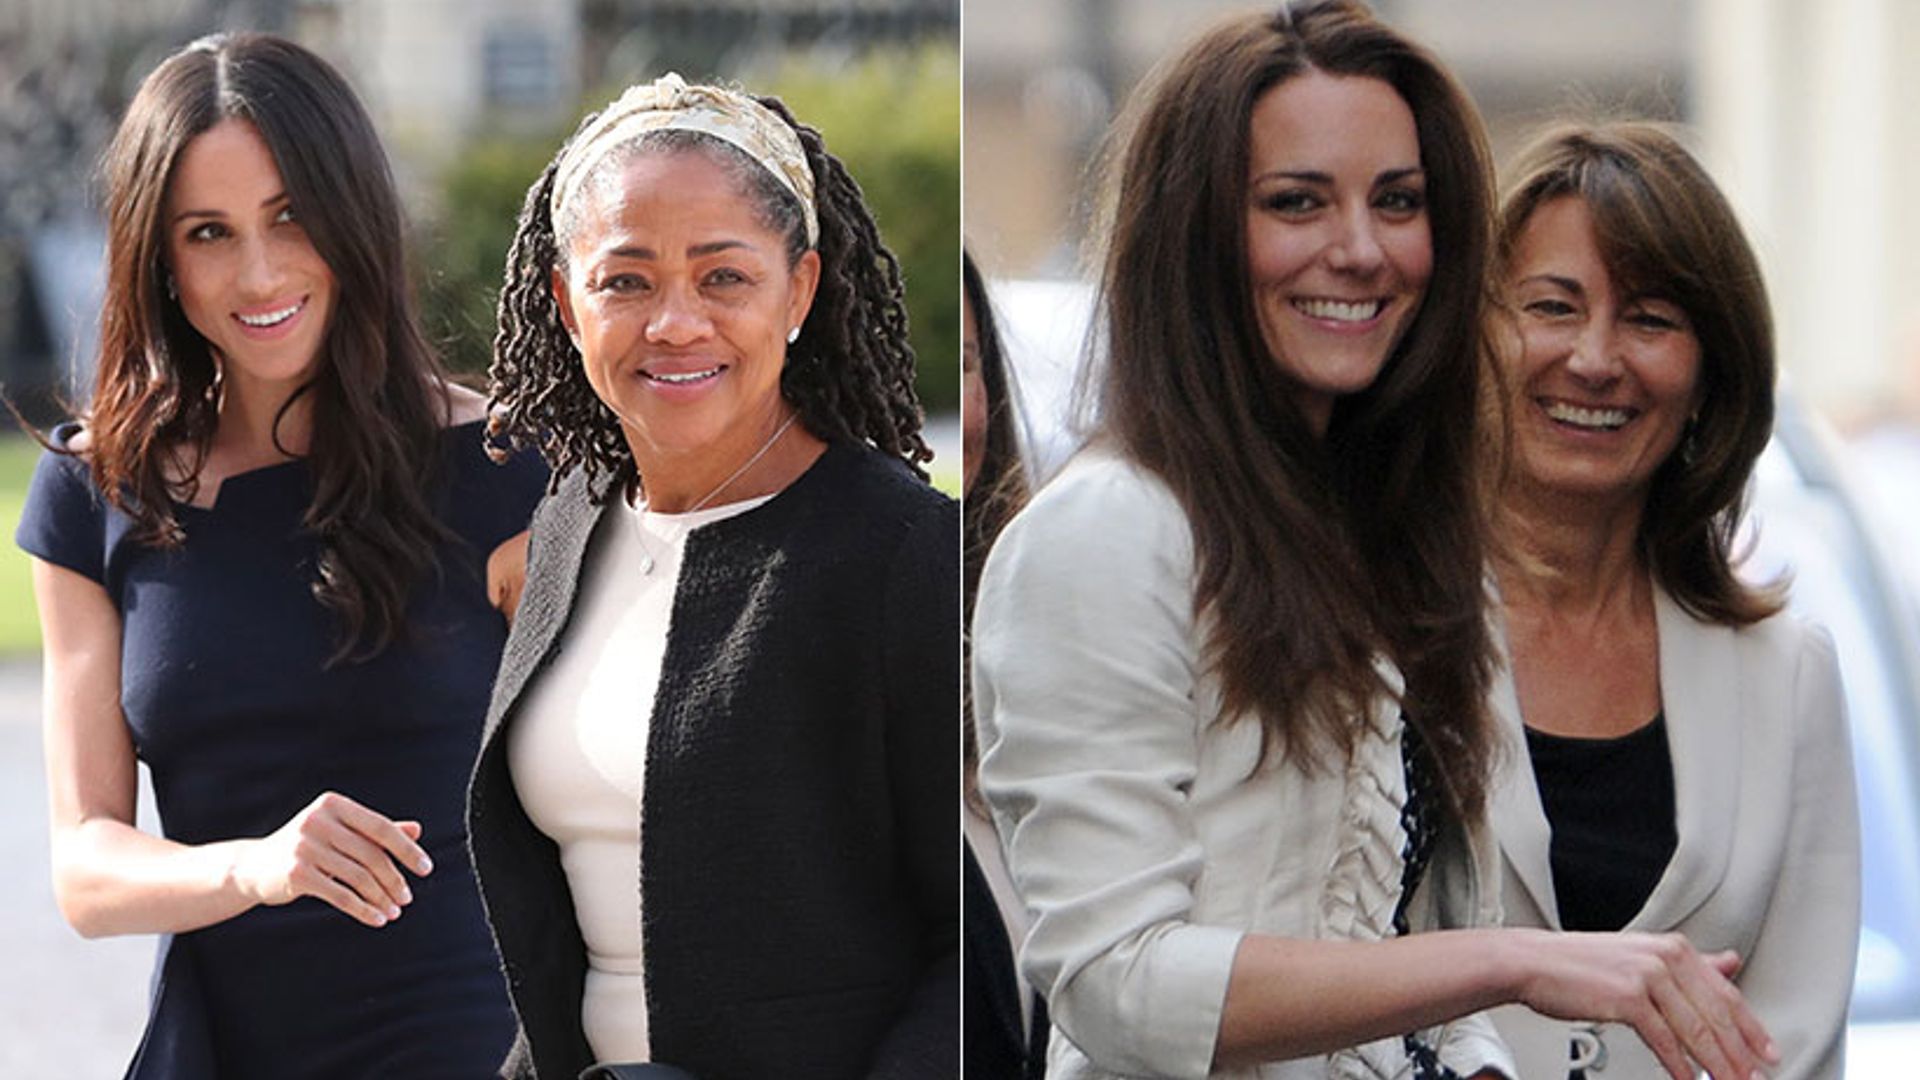 Meghan Markle and Kate Middleton's mums: their royal roles